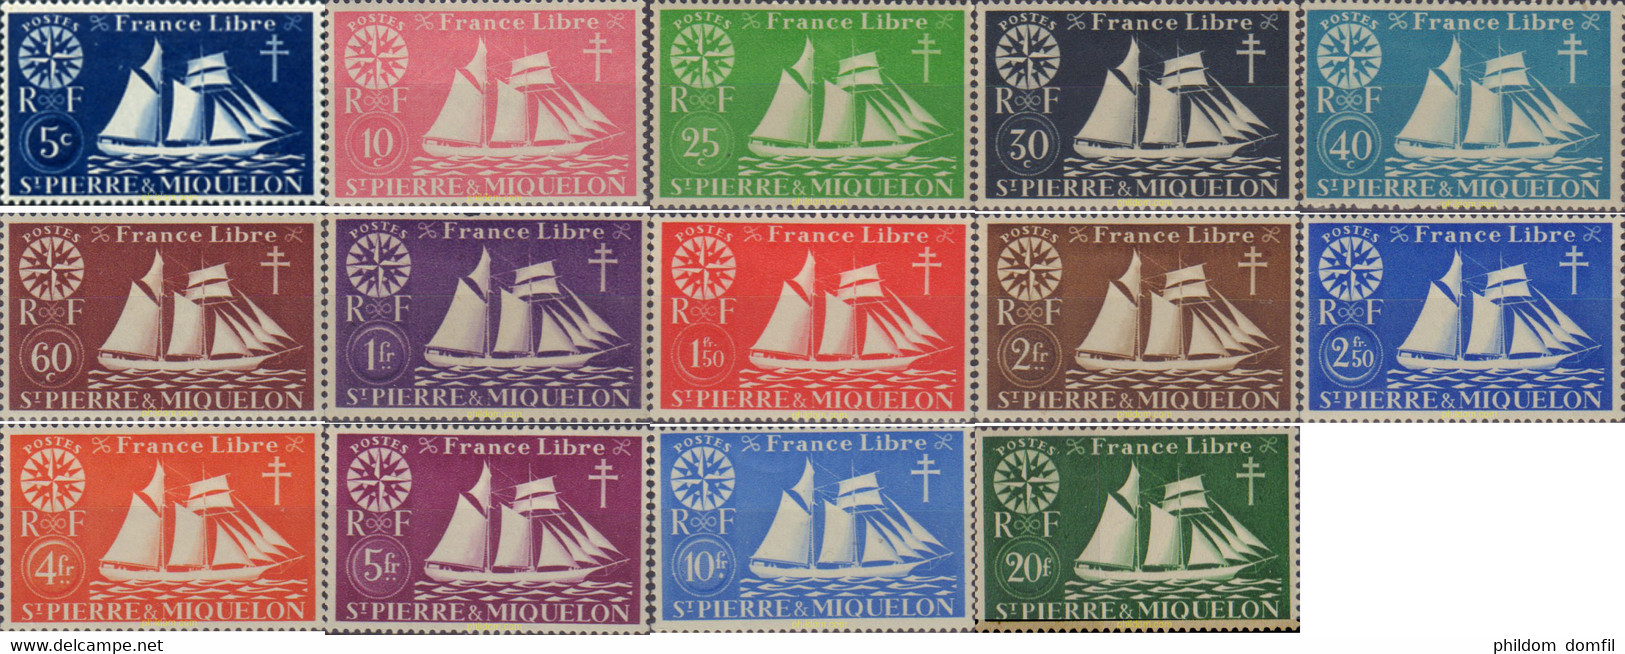 161129 MNH SAN PEDRO Y MIQUELON 1942 SERIE BASICA - Used Stamps